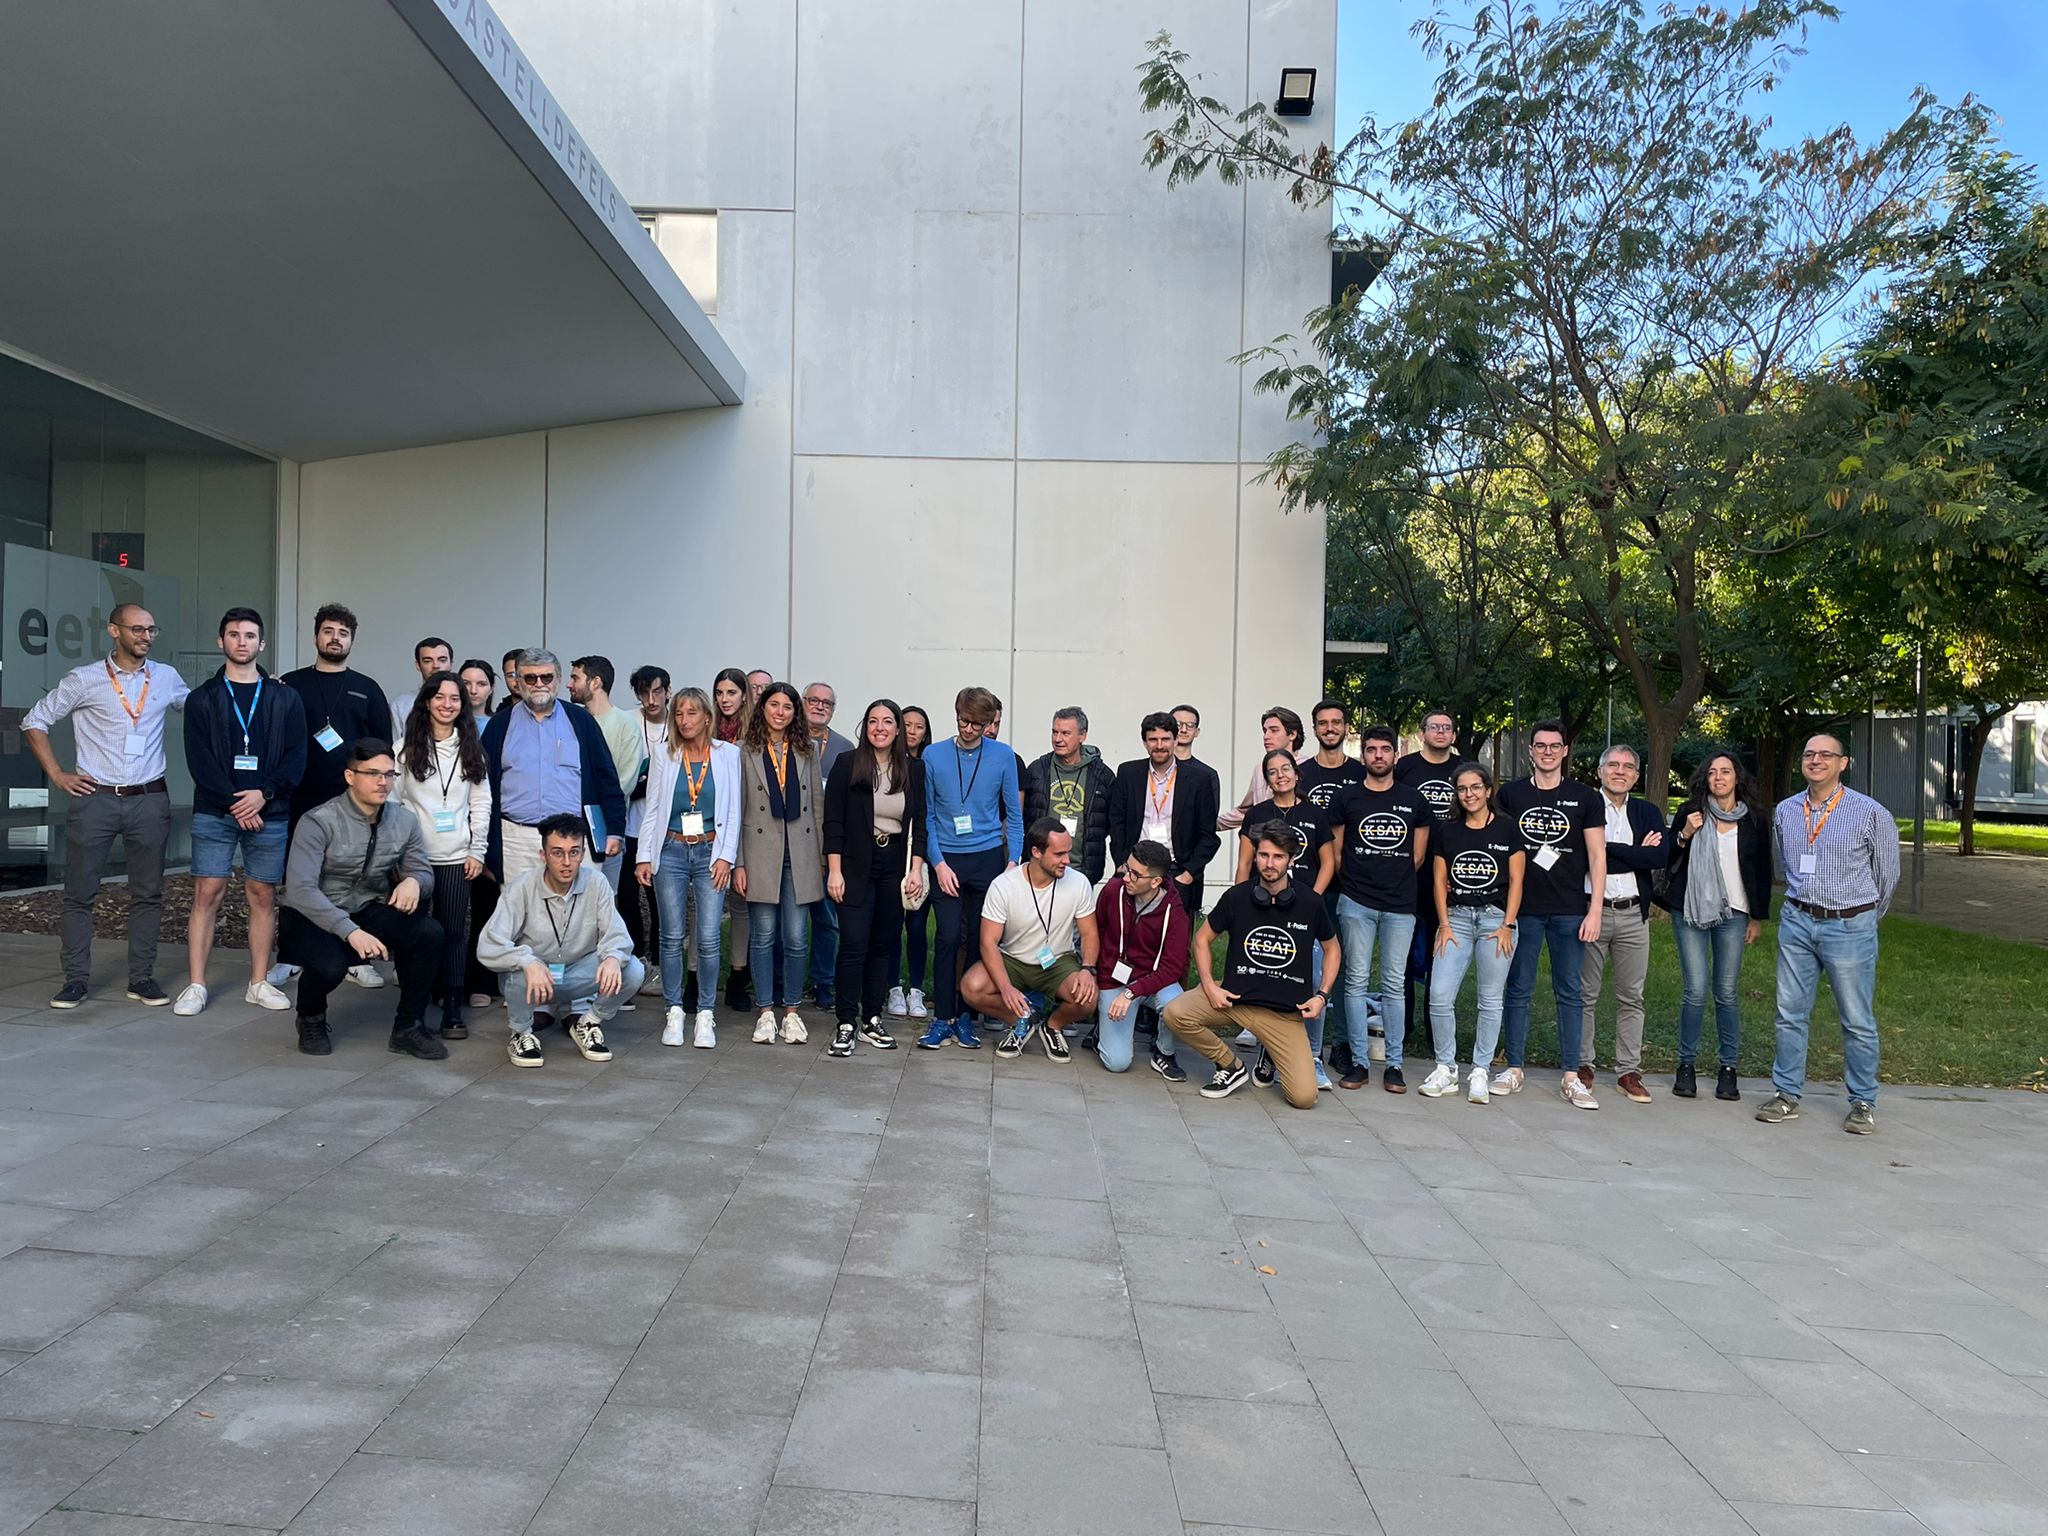 5 projects with space data presented at the 4th CASSINI Hackathon in Barcelona